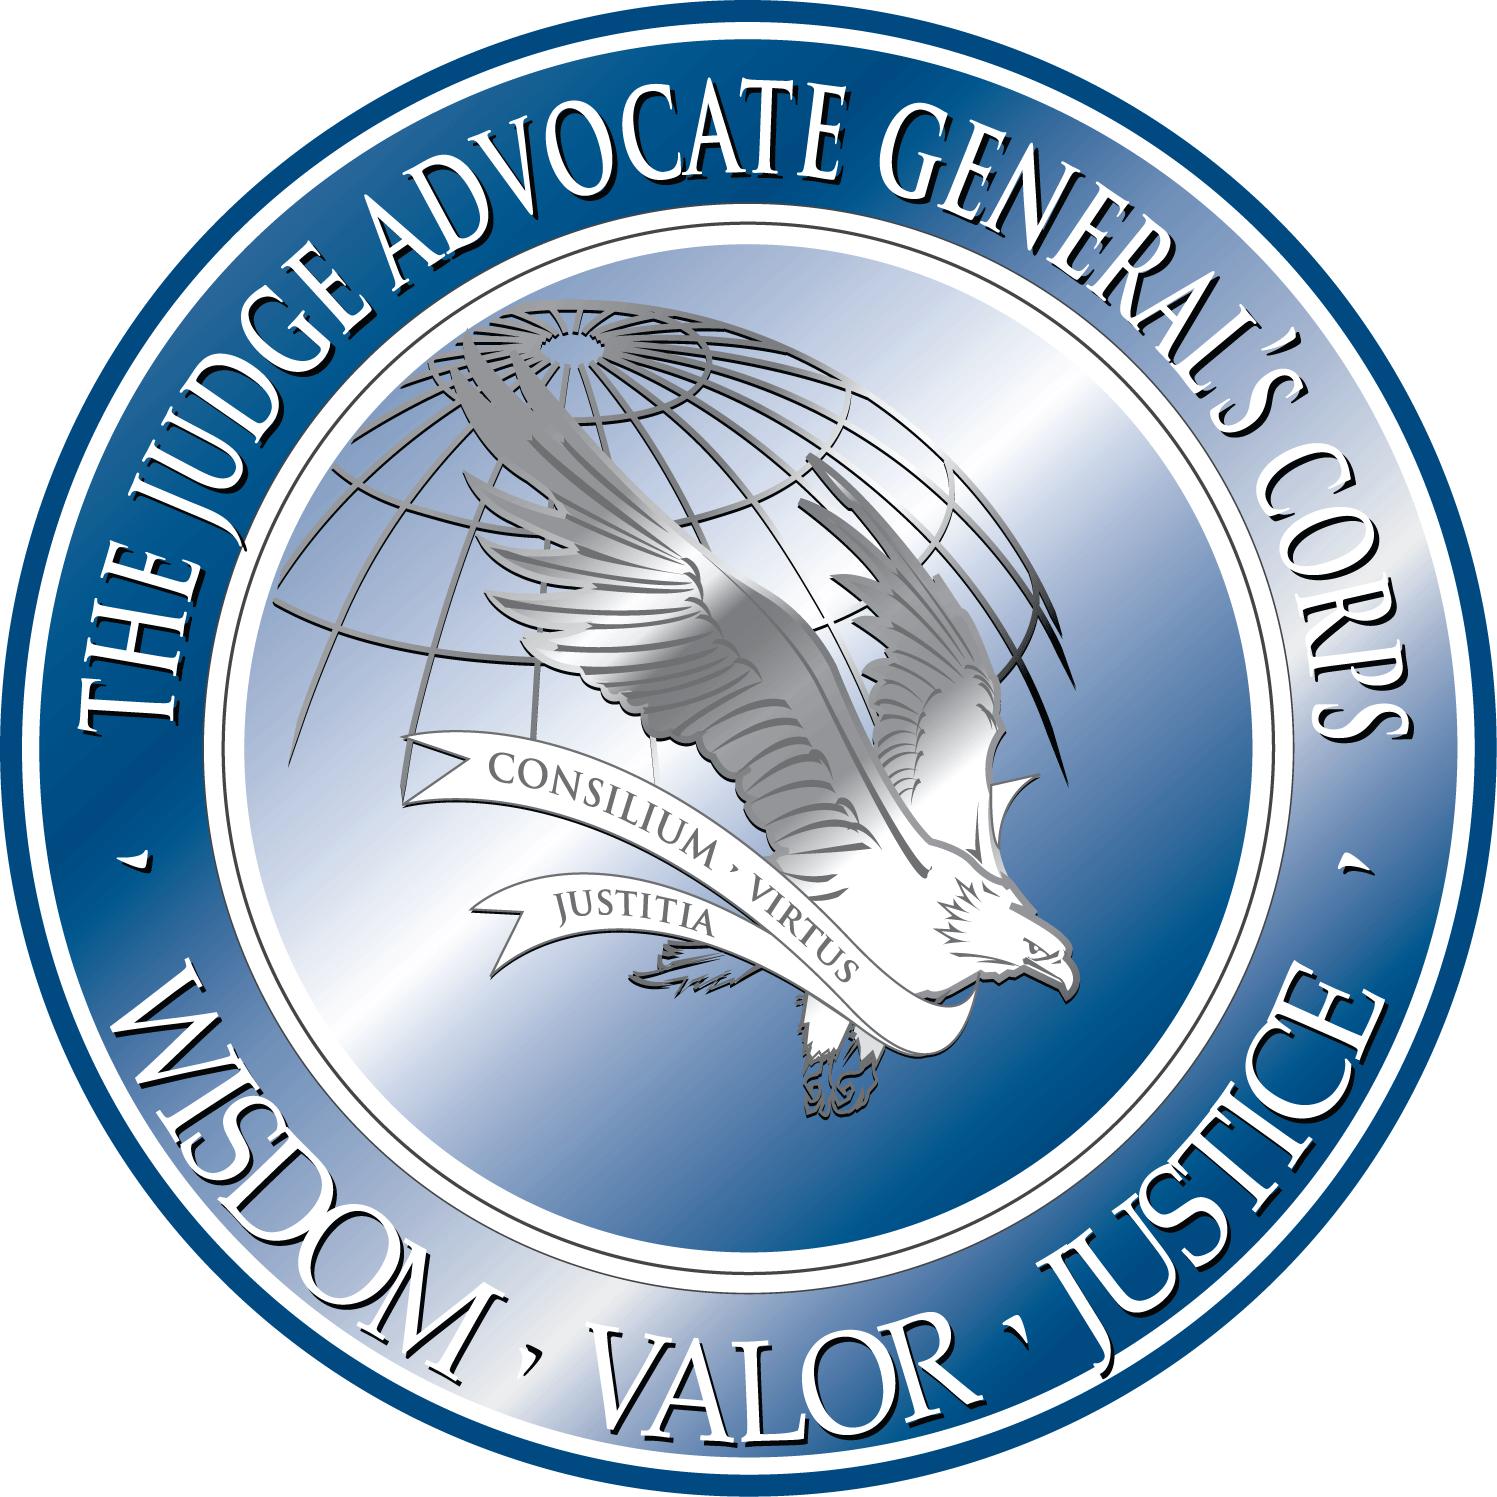 New Air Force Logo - Hill AFB Legal Services > Hill Air Force Base > Display